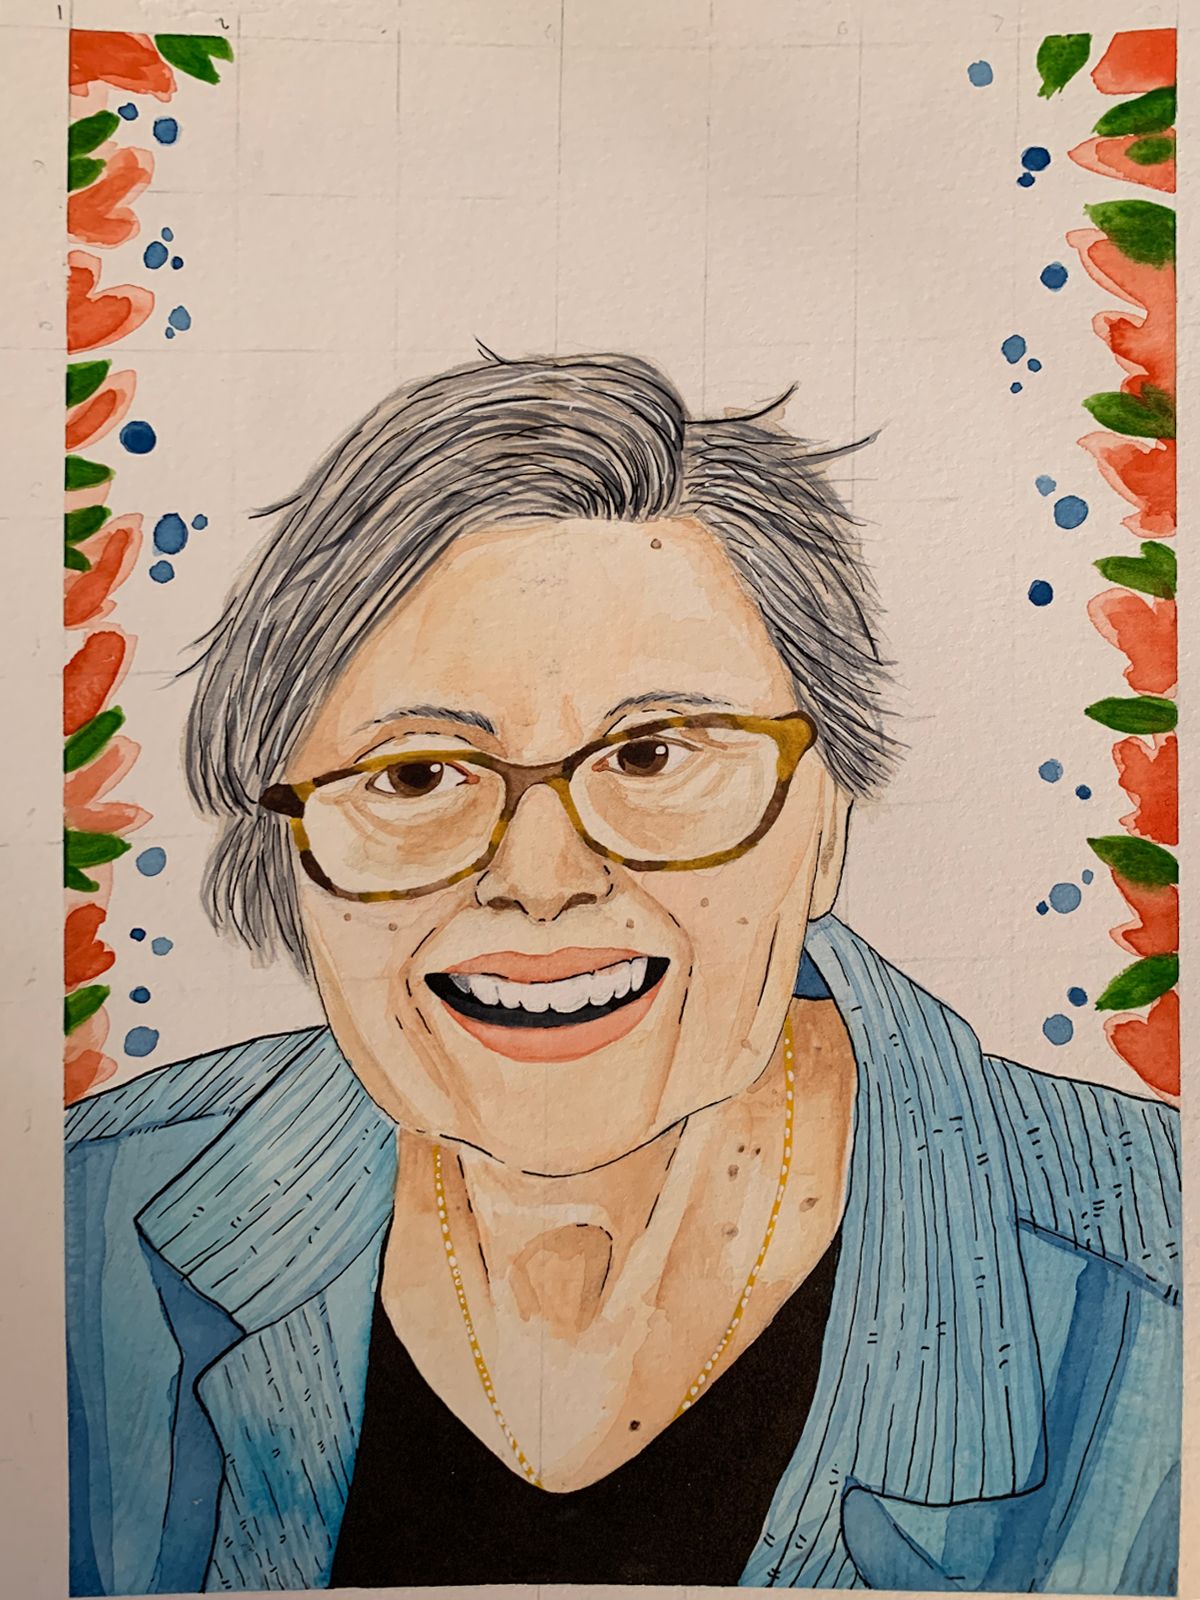 portrait of older woman with a blue top and glasses, border of red flowers, green leaves, and blue dots; grid visible in background